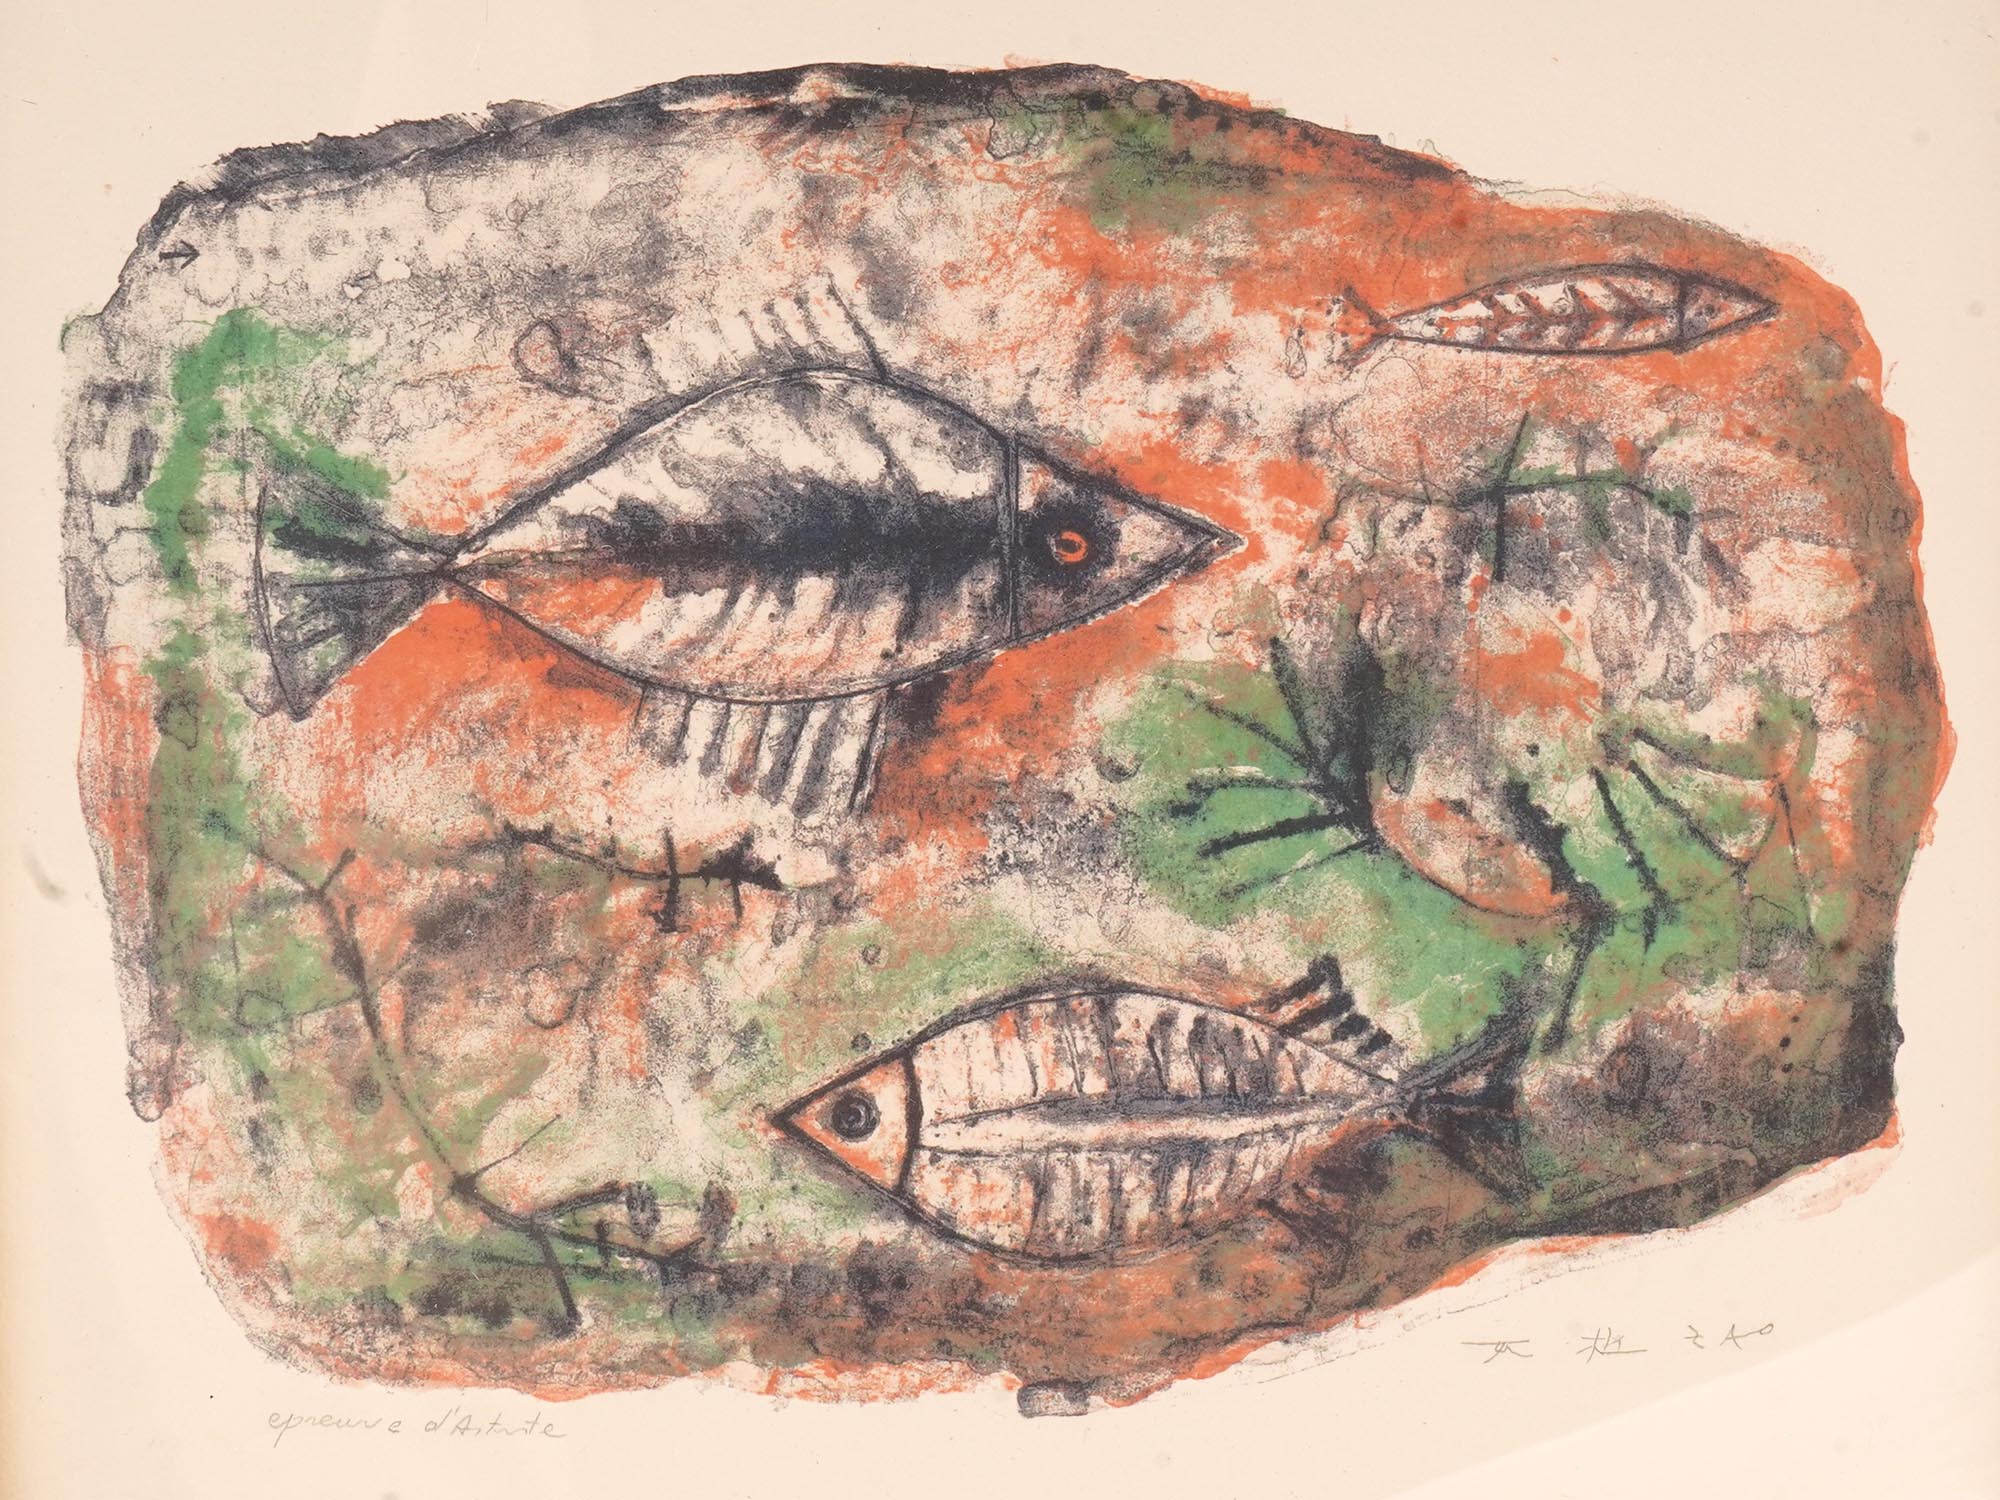 ABSTRACT CHINESE FISH LITHOGRAPH BY WOU KI ZAO PIC-1